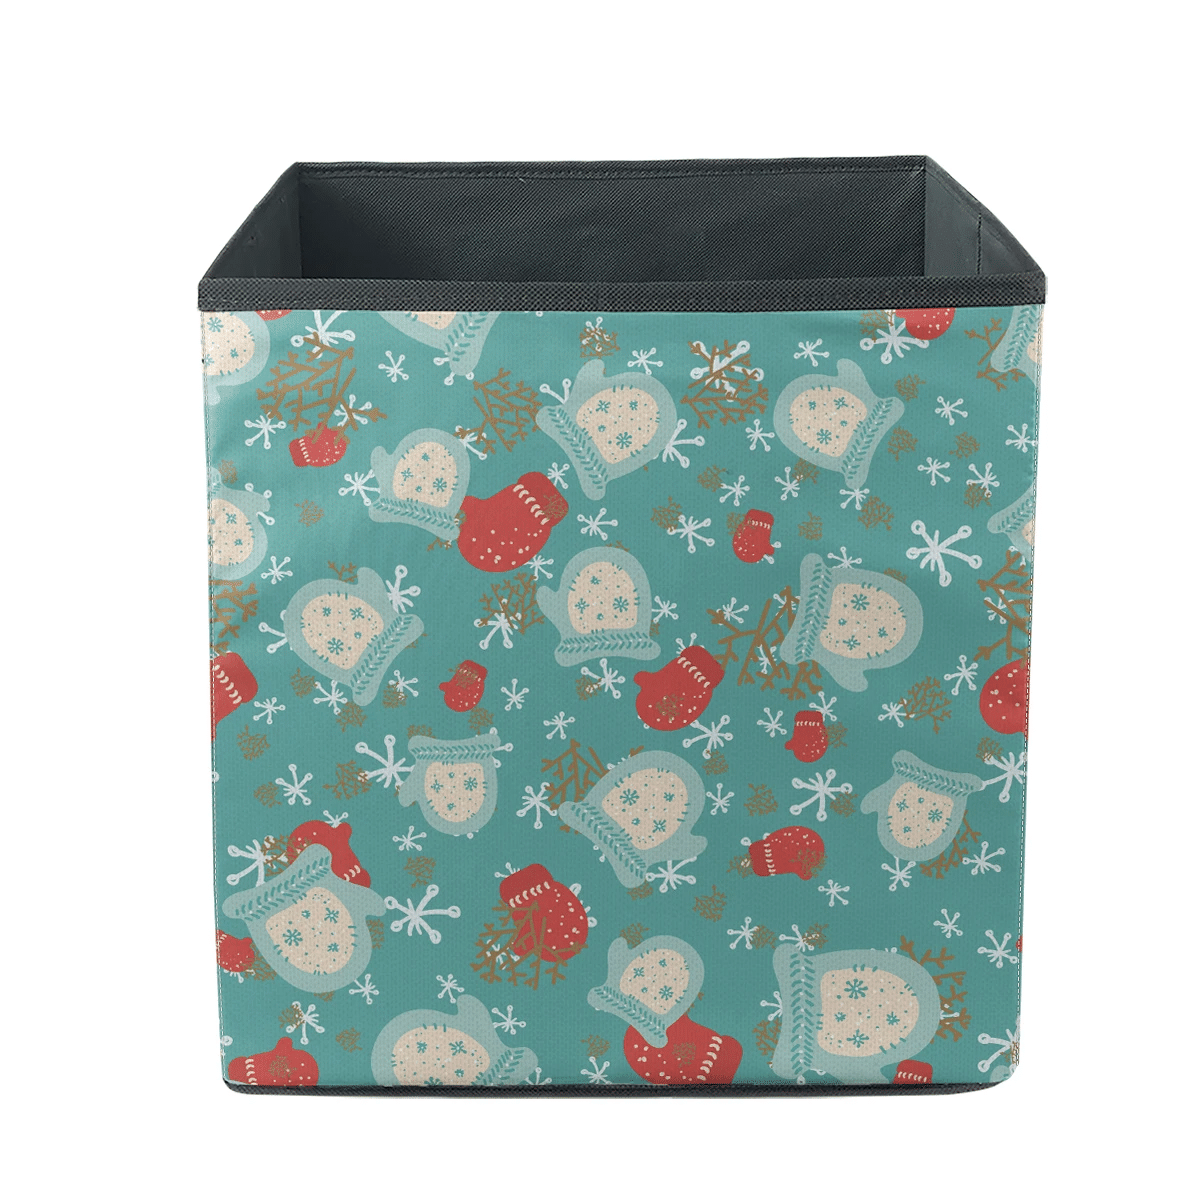 Special Decorative Christmas With Snowflakes Mittens And Tree Branches Storage Bin Storage Cube